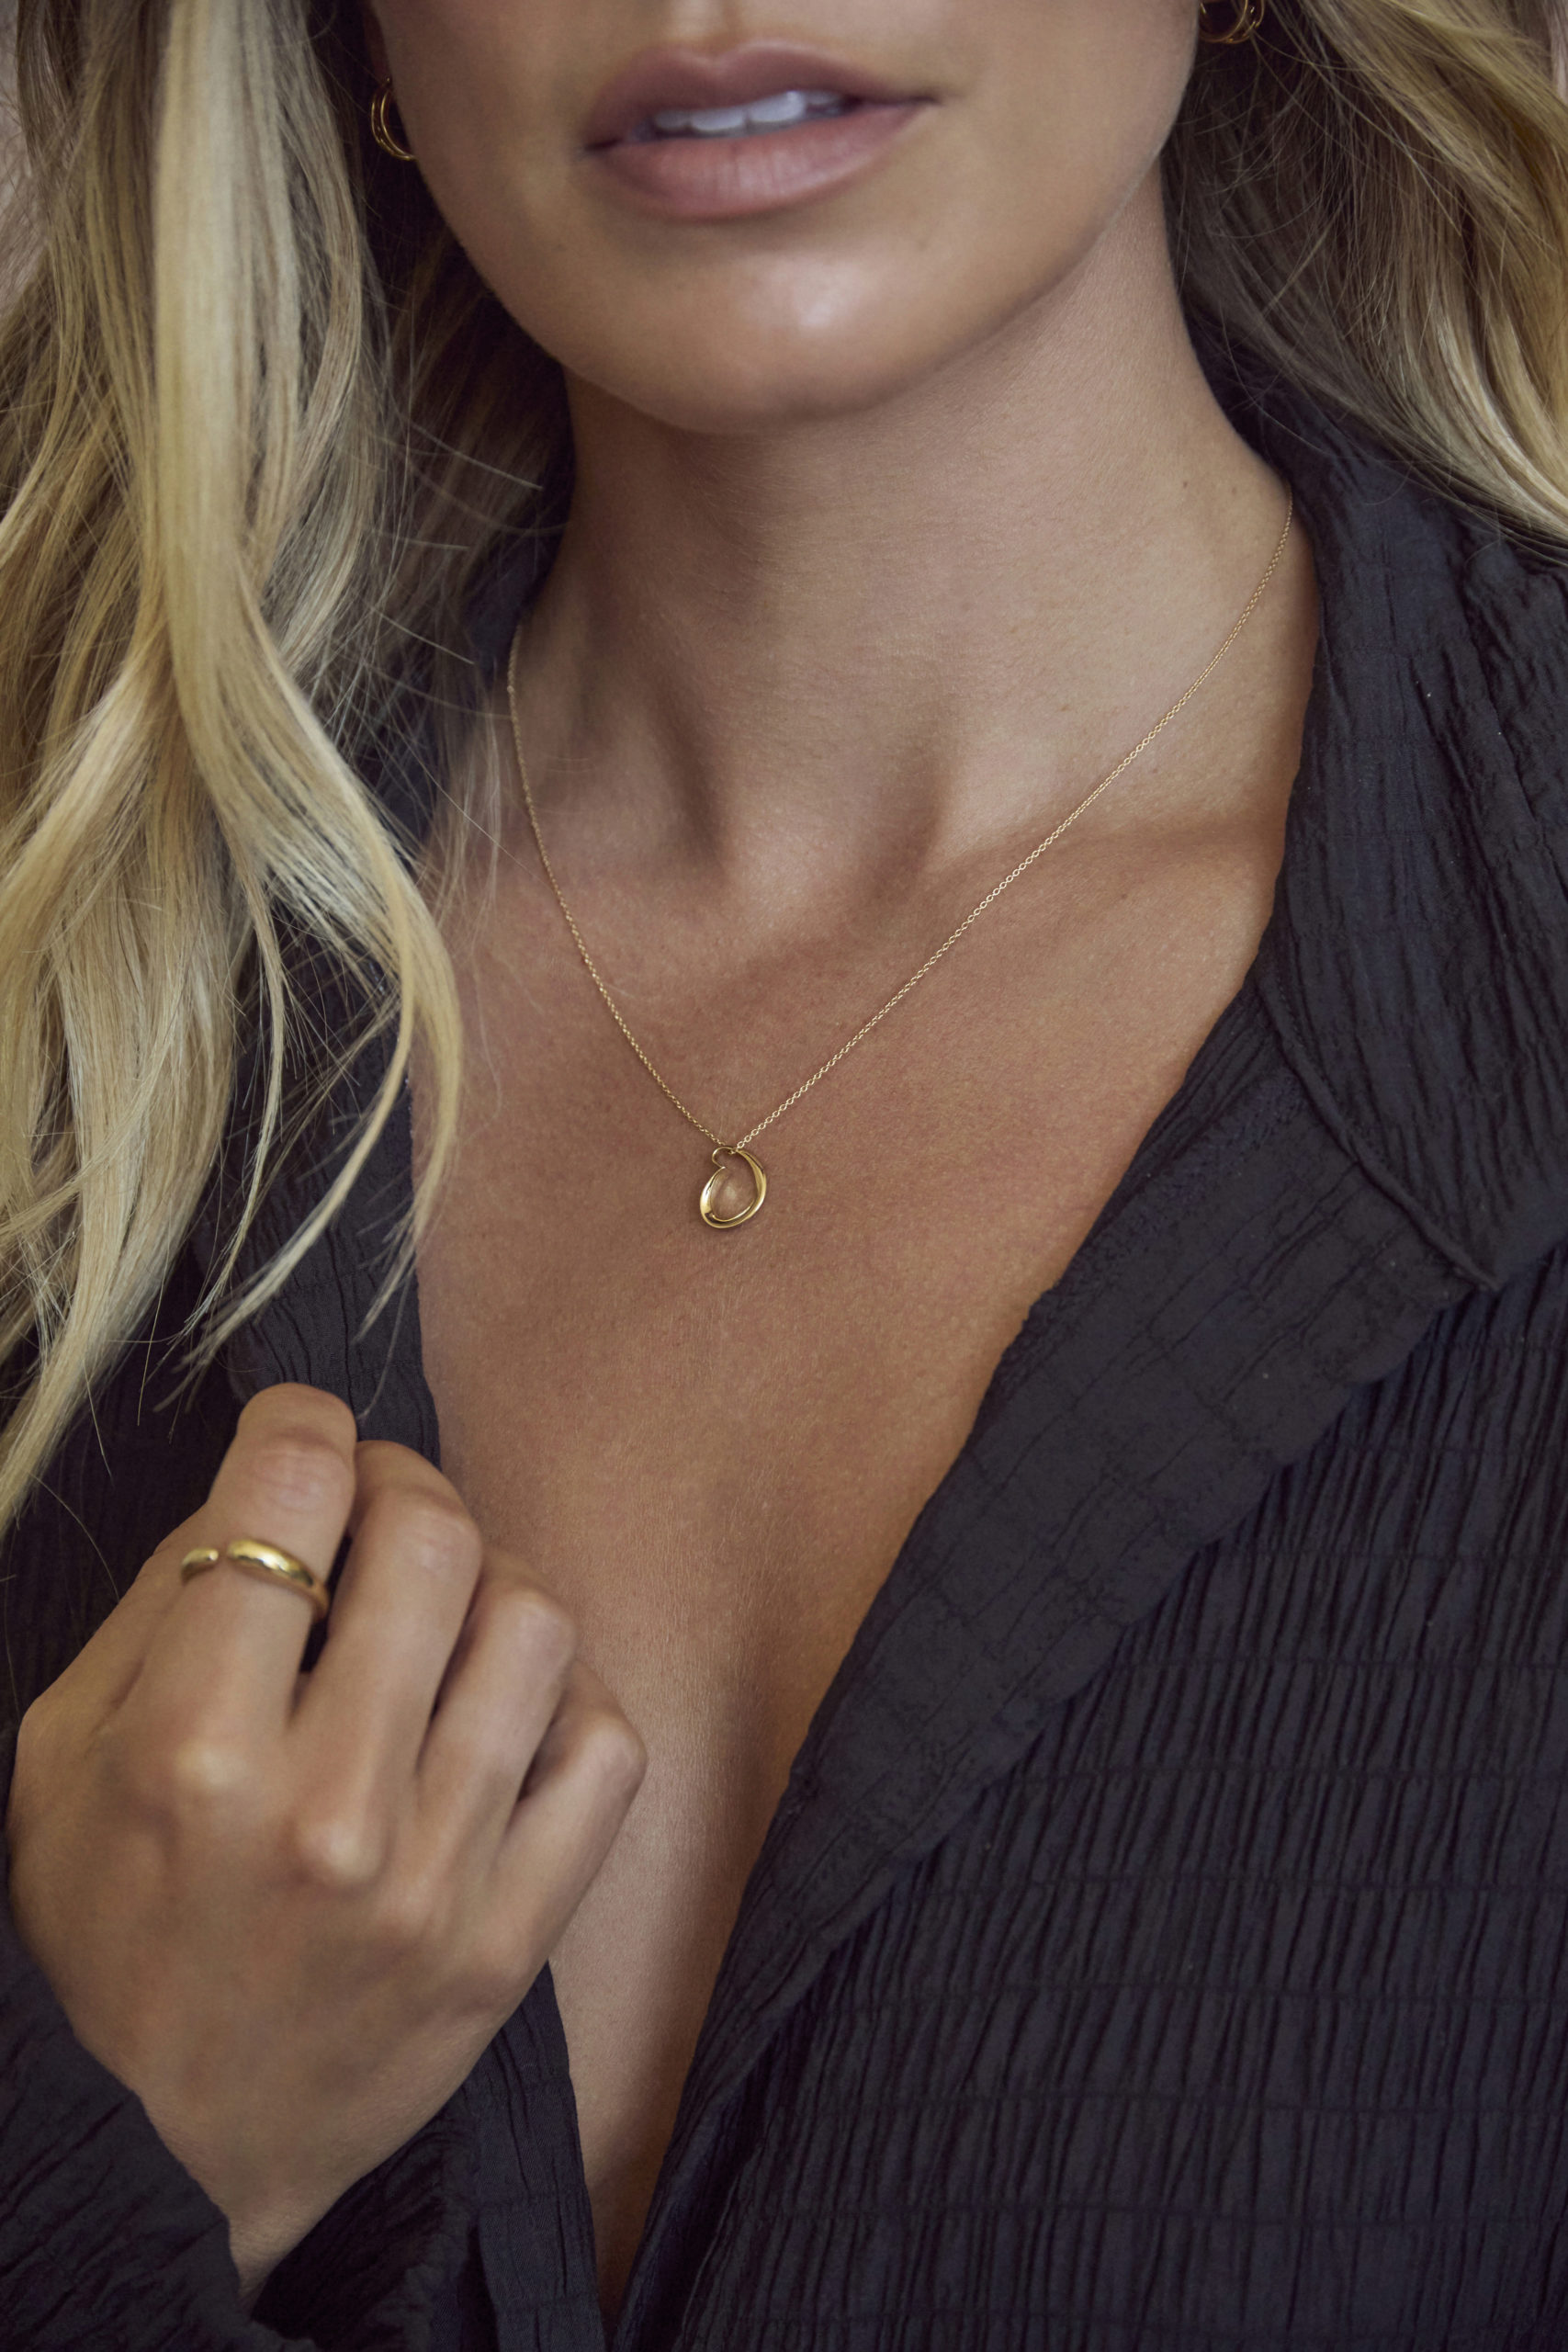 A photo of Renee Bargh for the 2021 OCRF x Georg Jensen campaign